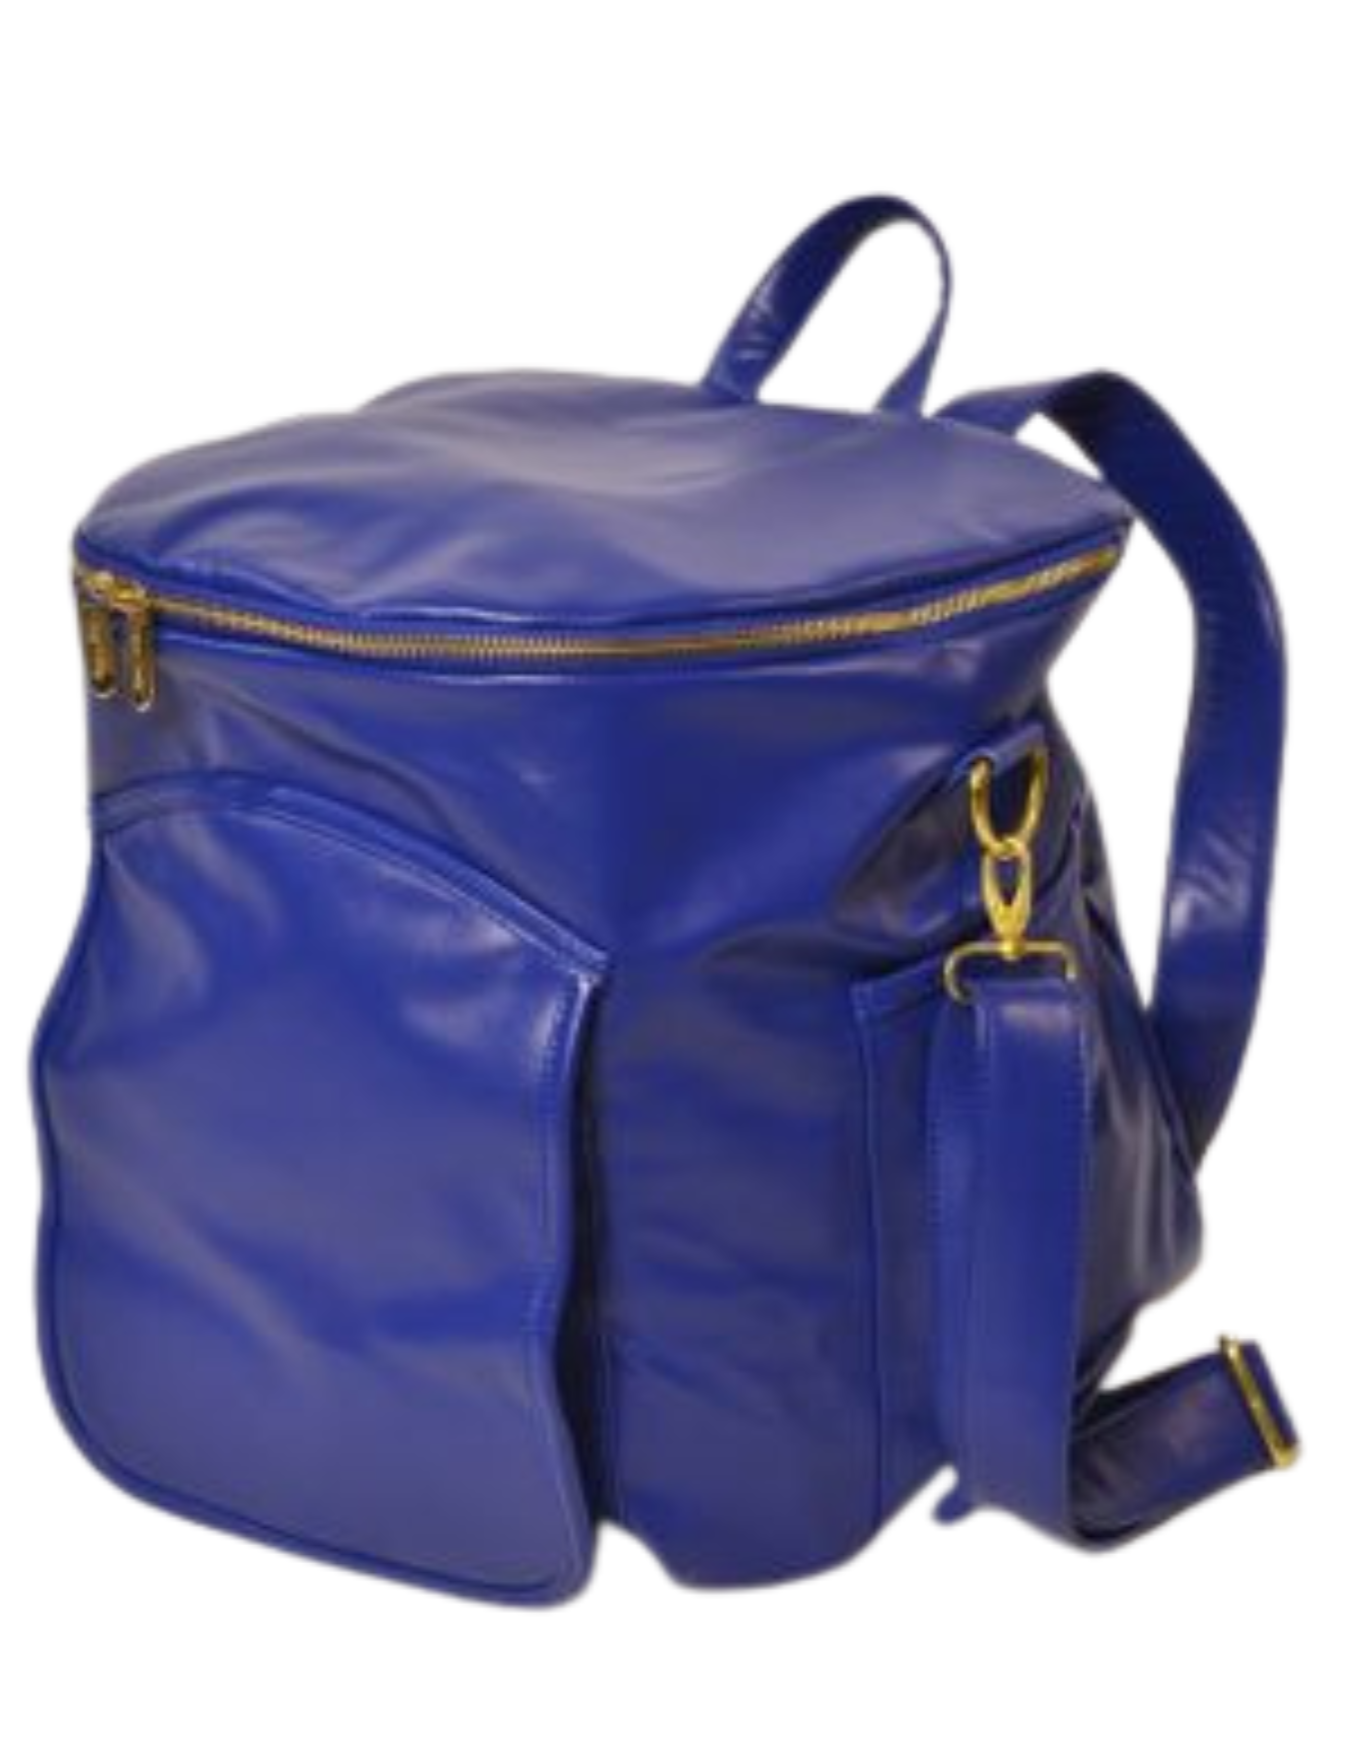 Metallic Silver Leather Back Pack – sassy-caddy-inc.